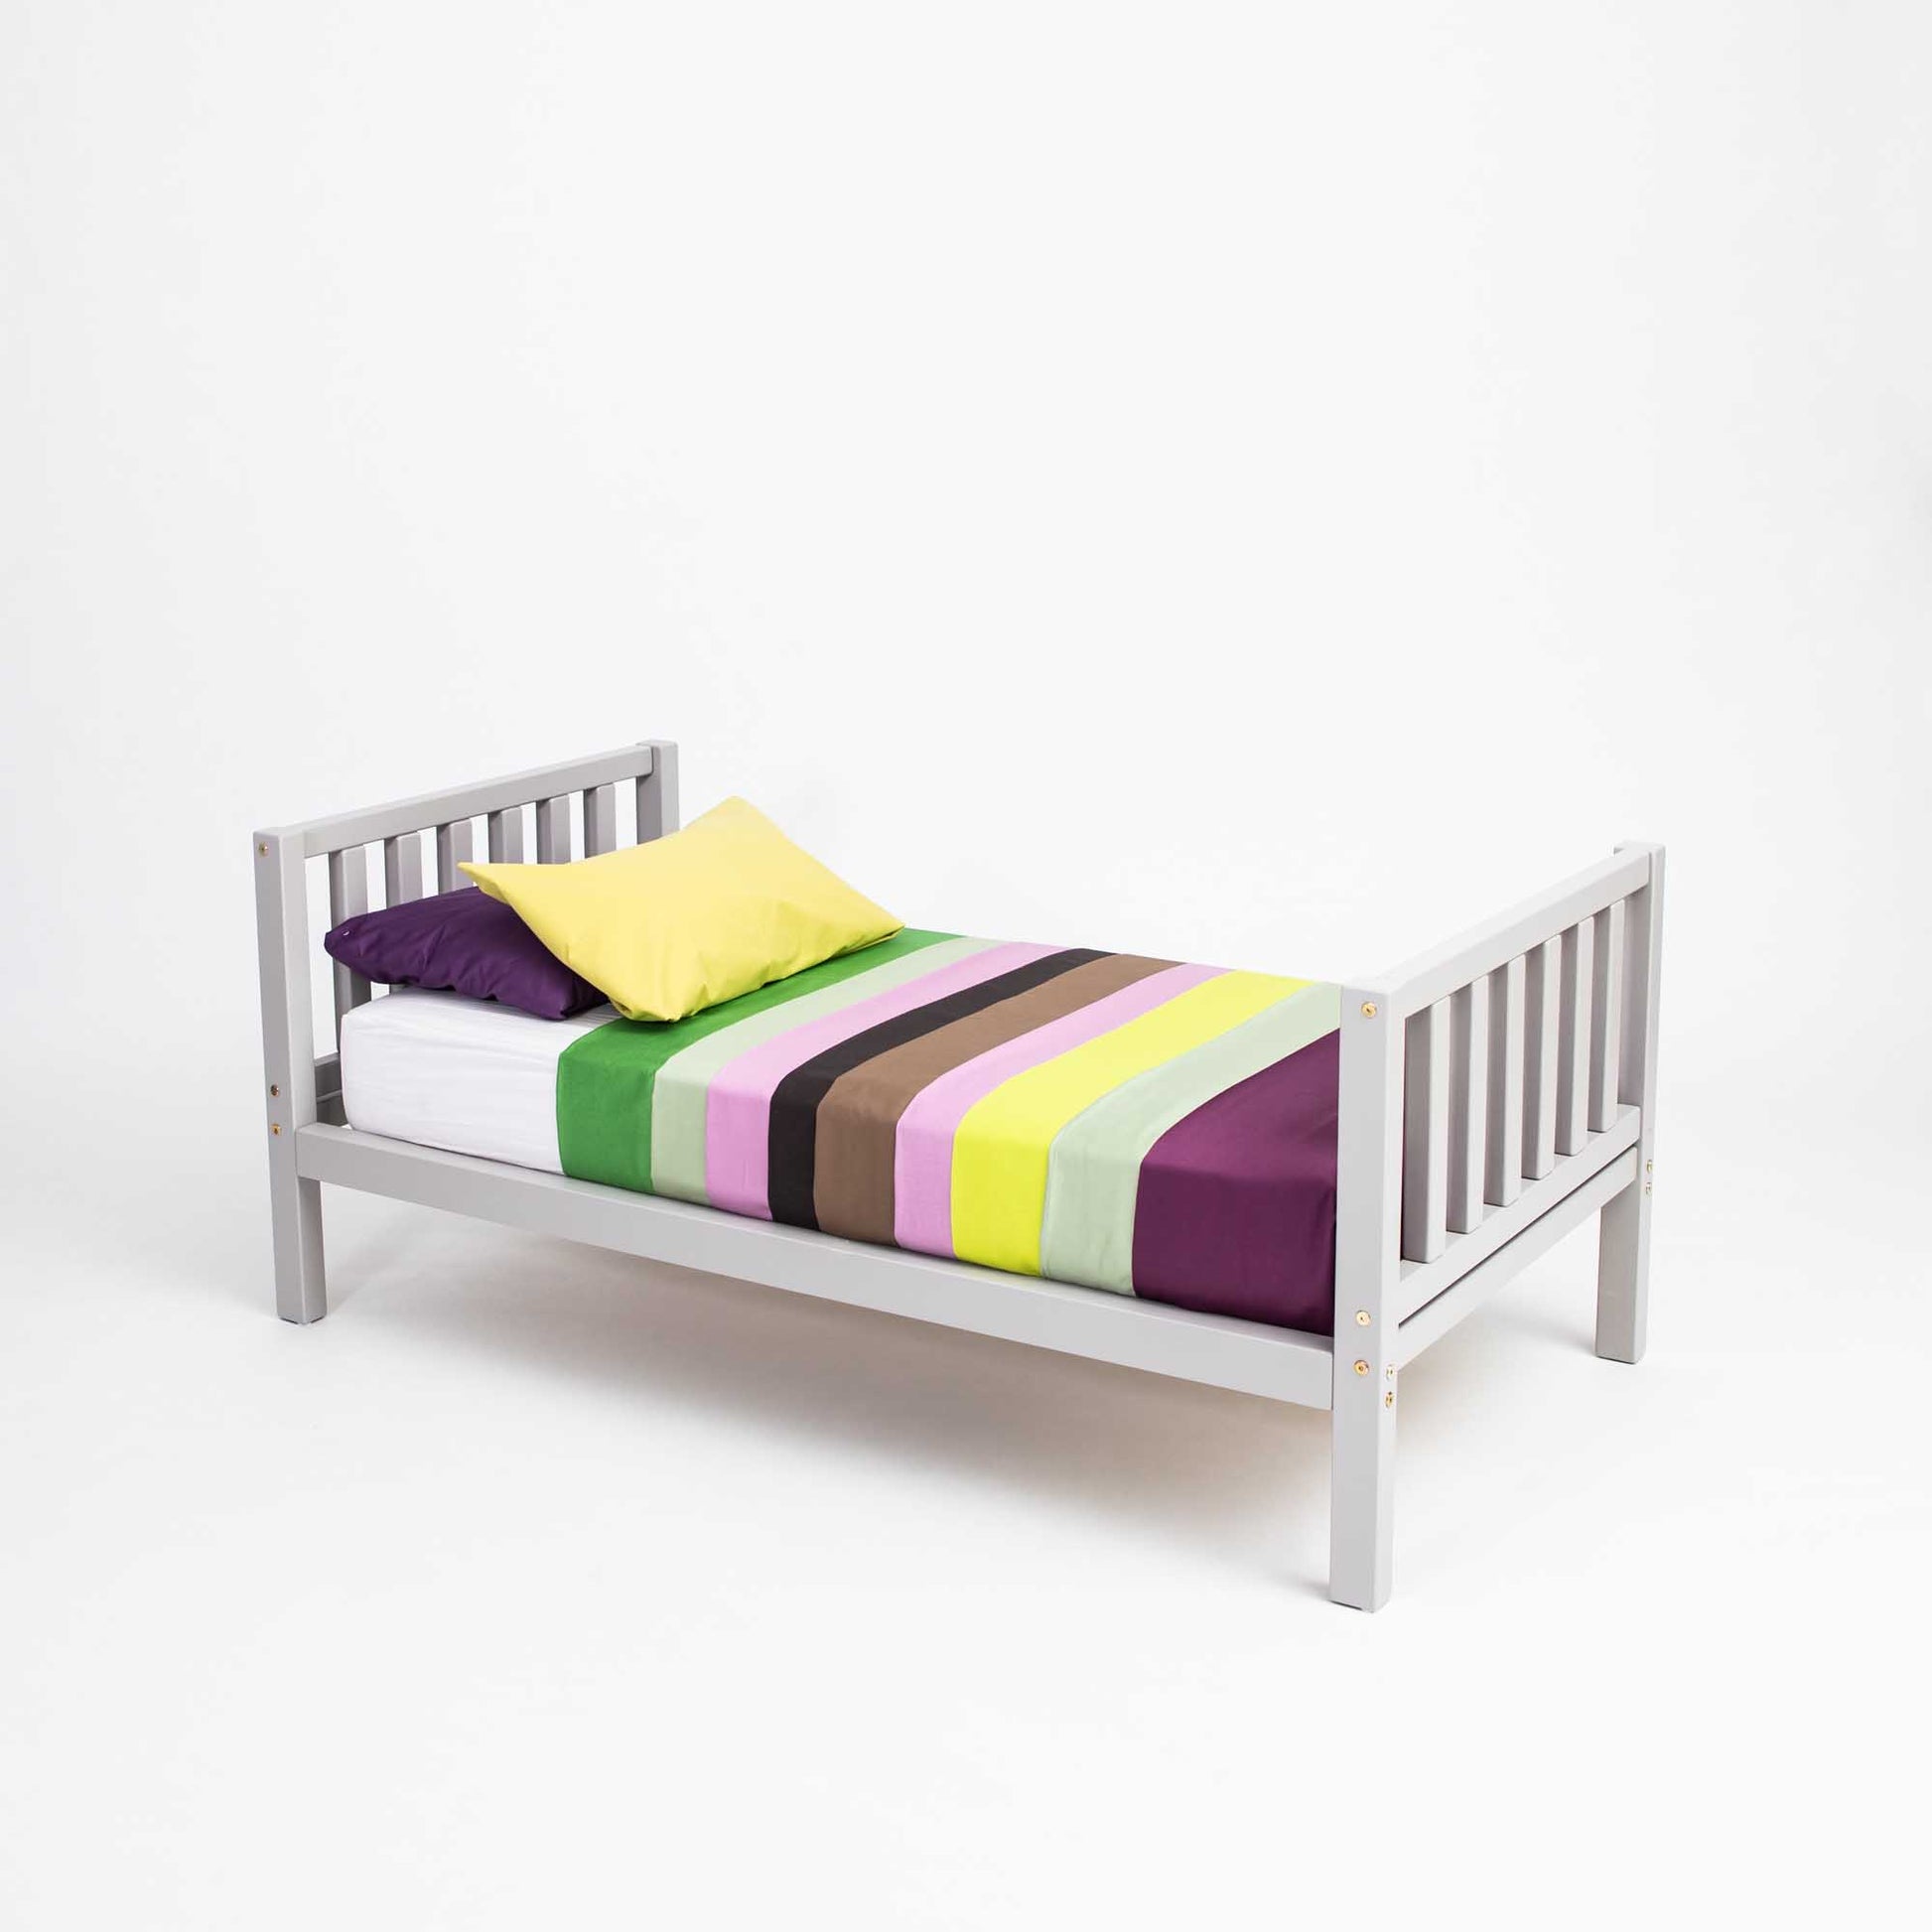 A 2-in-1 kid's bed on legs with a vertical rail headboard and footboard with colorful striped sheets made of solid pine or birch wood.